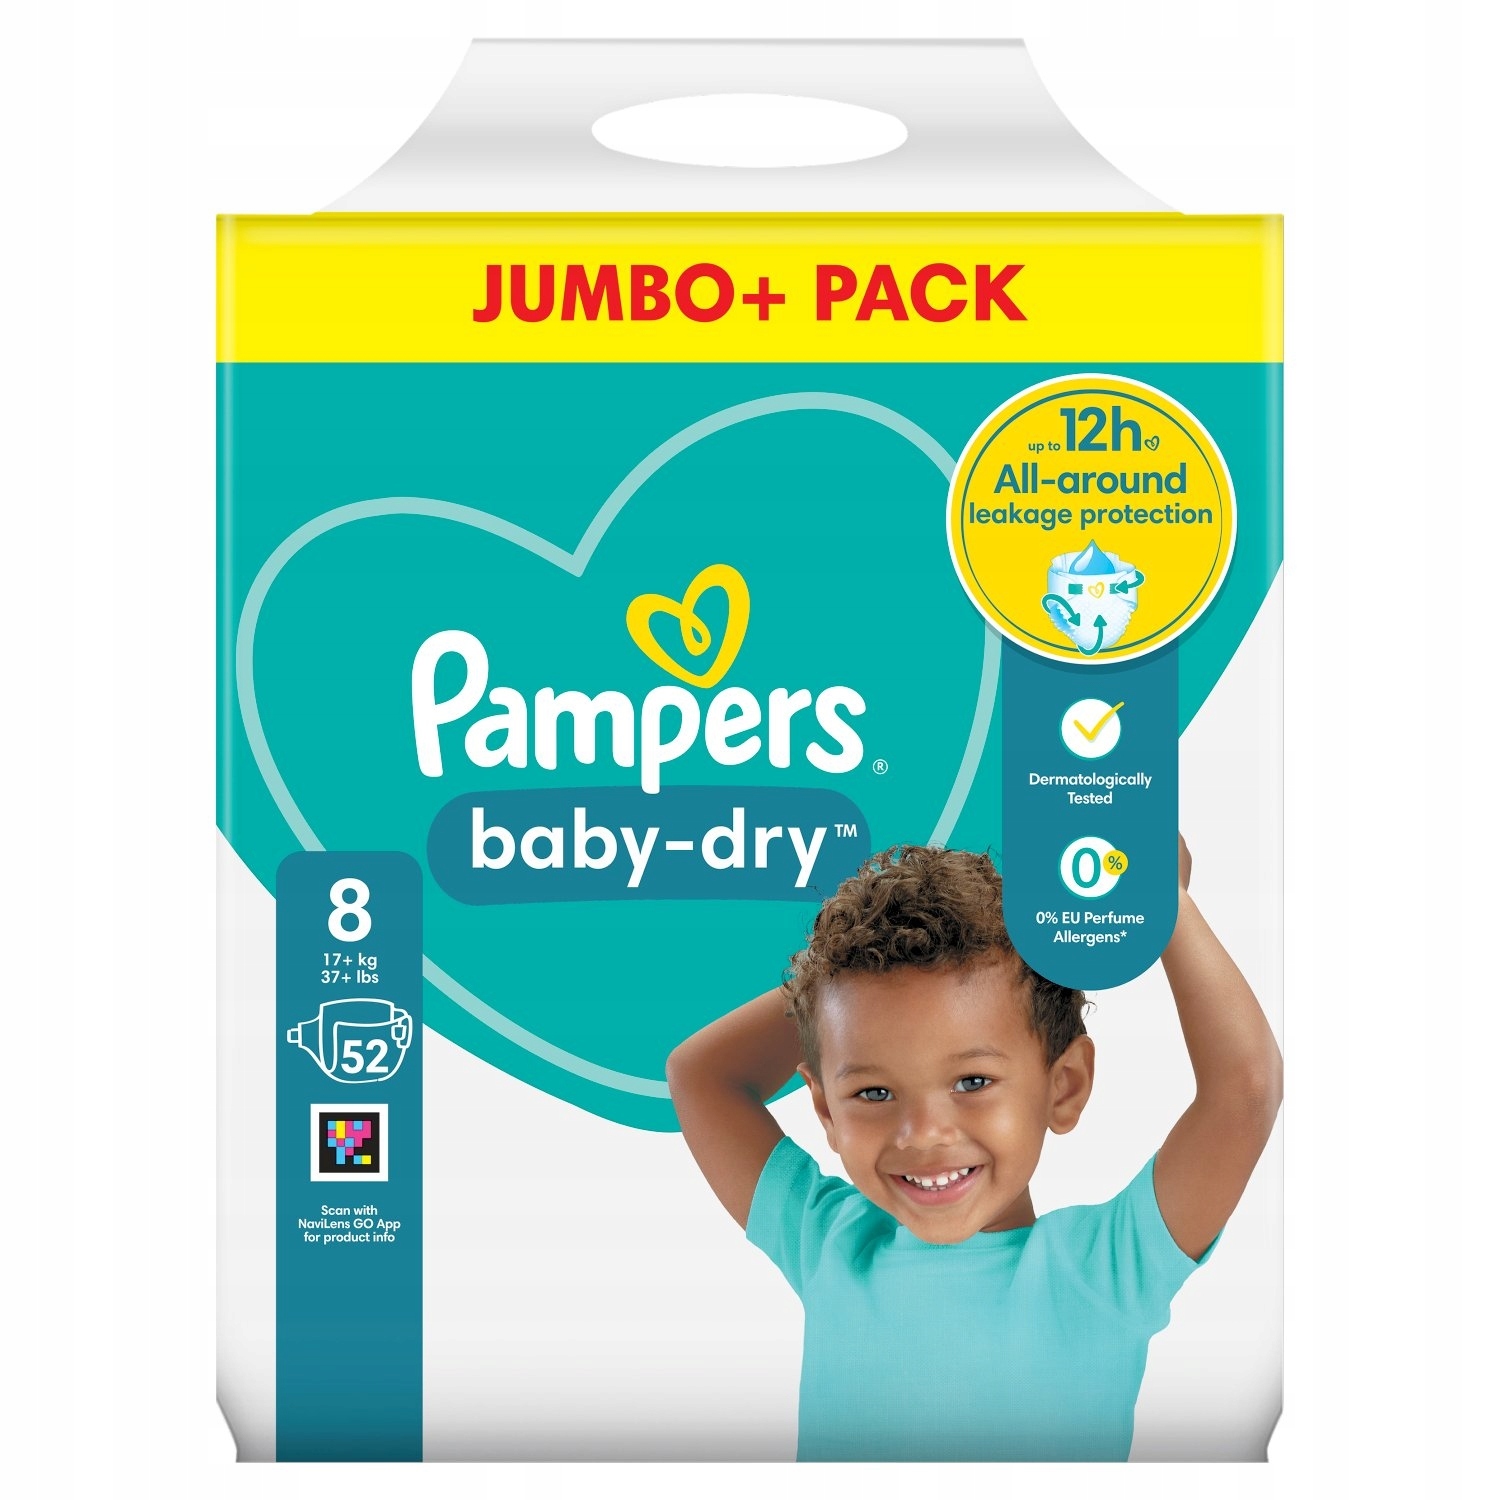 pampers rozmary